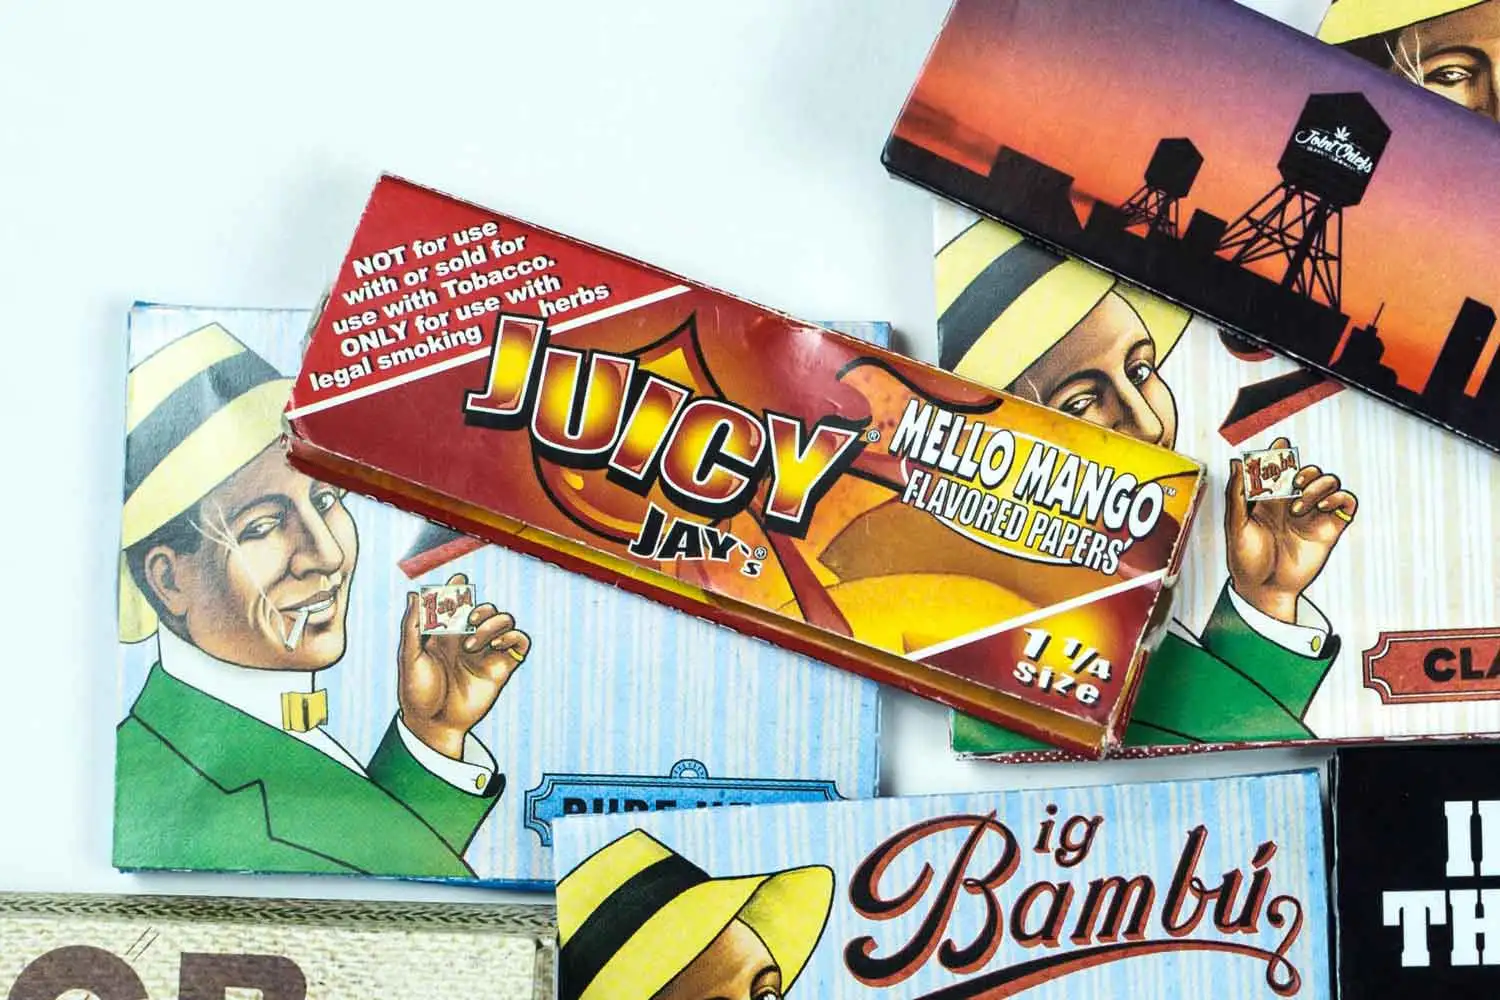 juicy mango flavored rolling papers